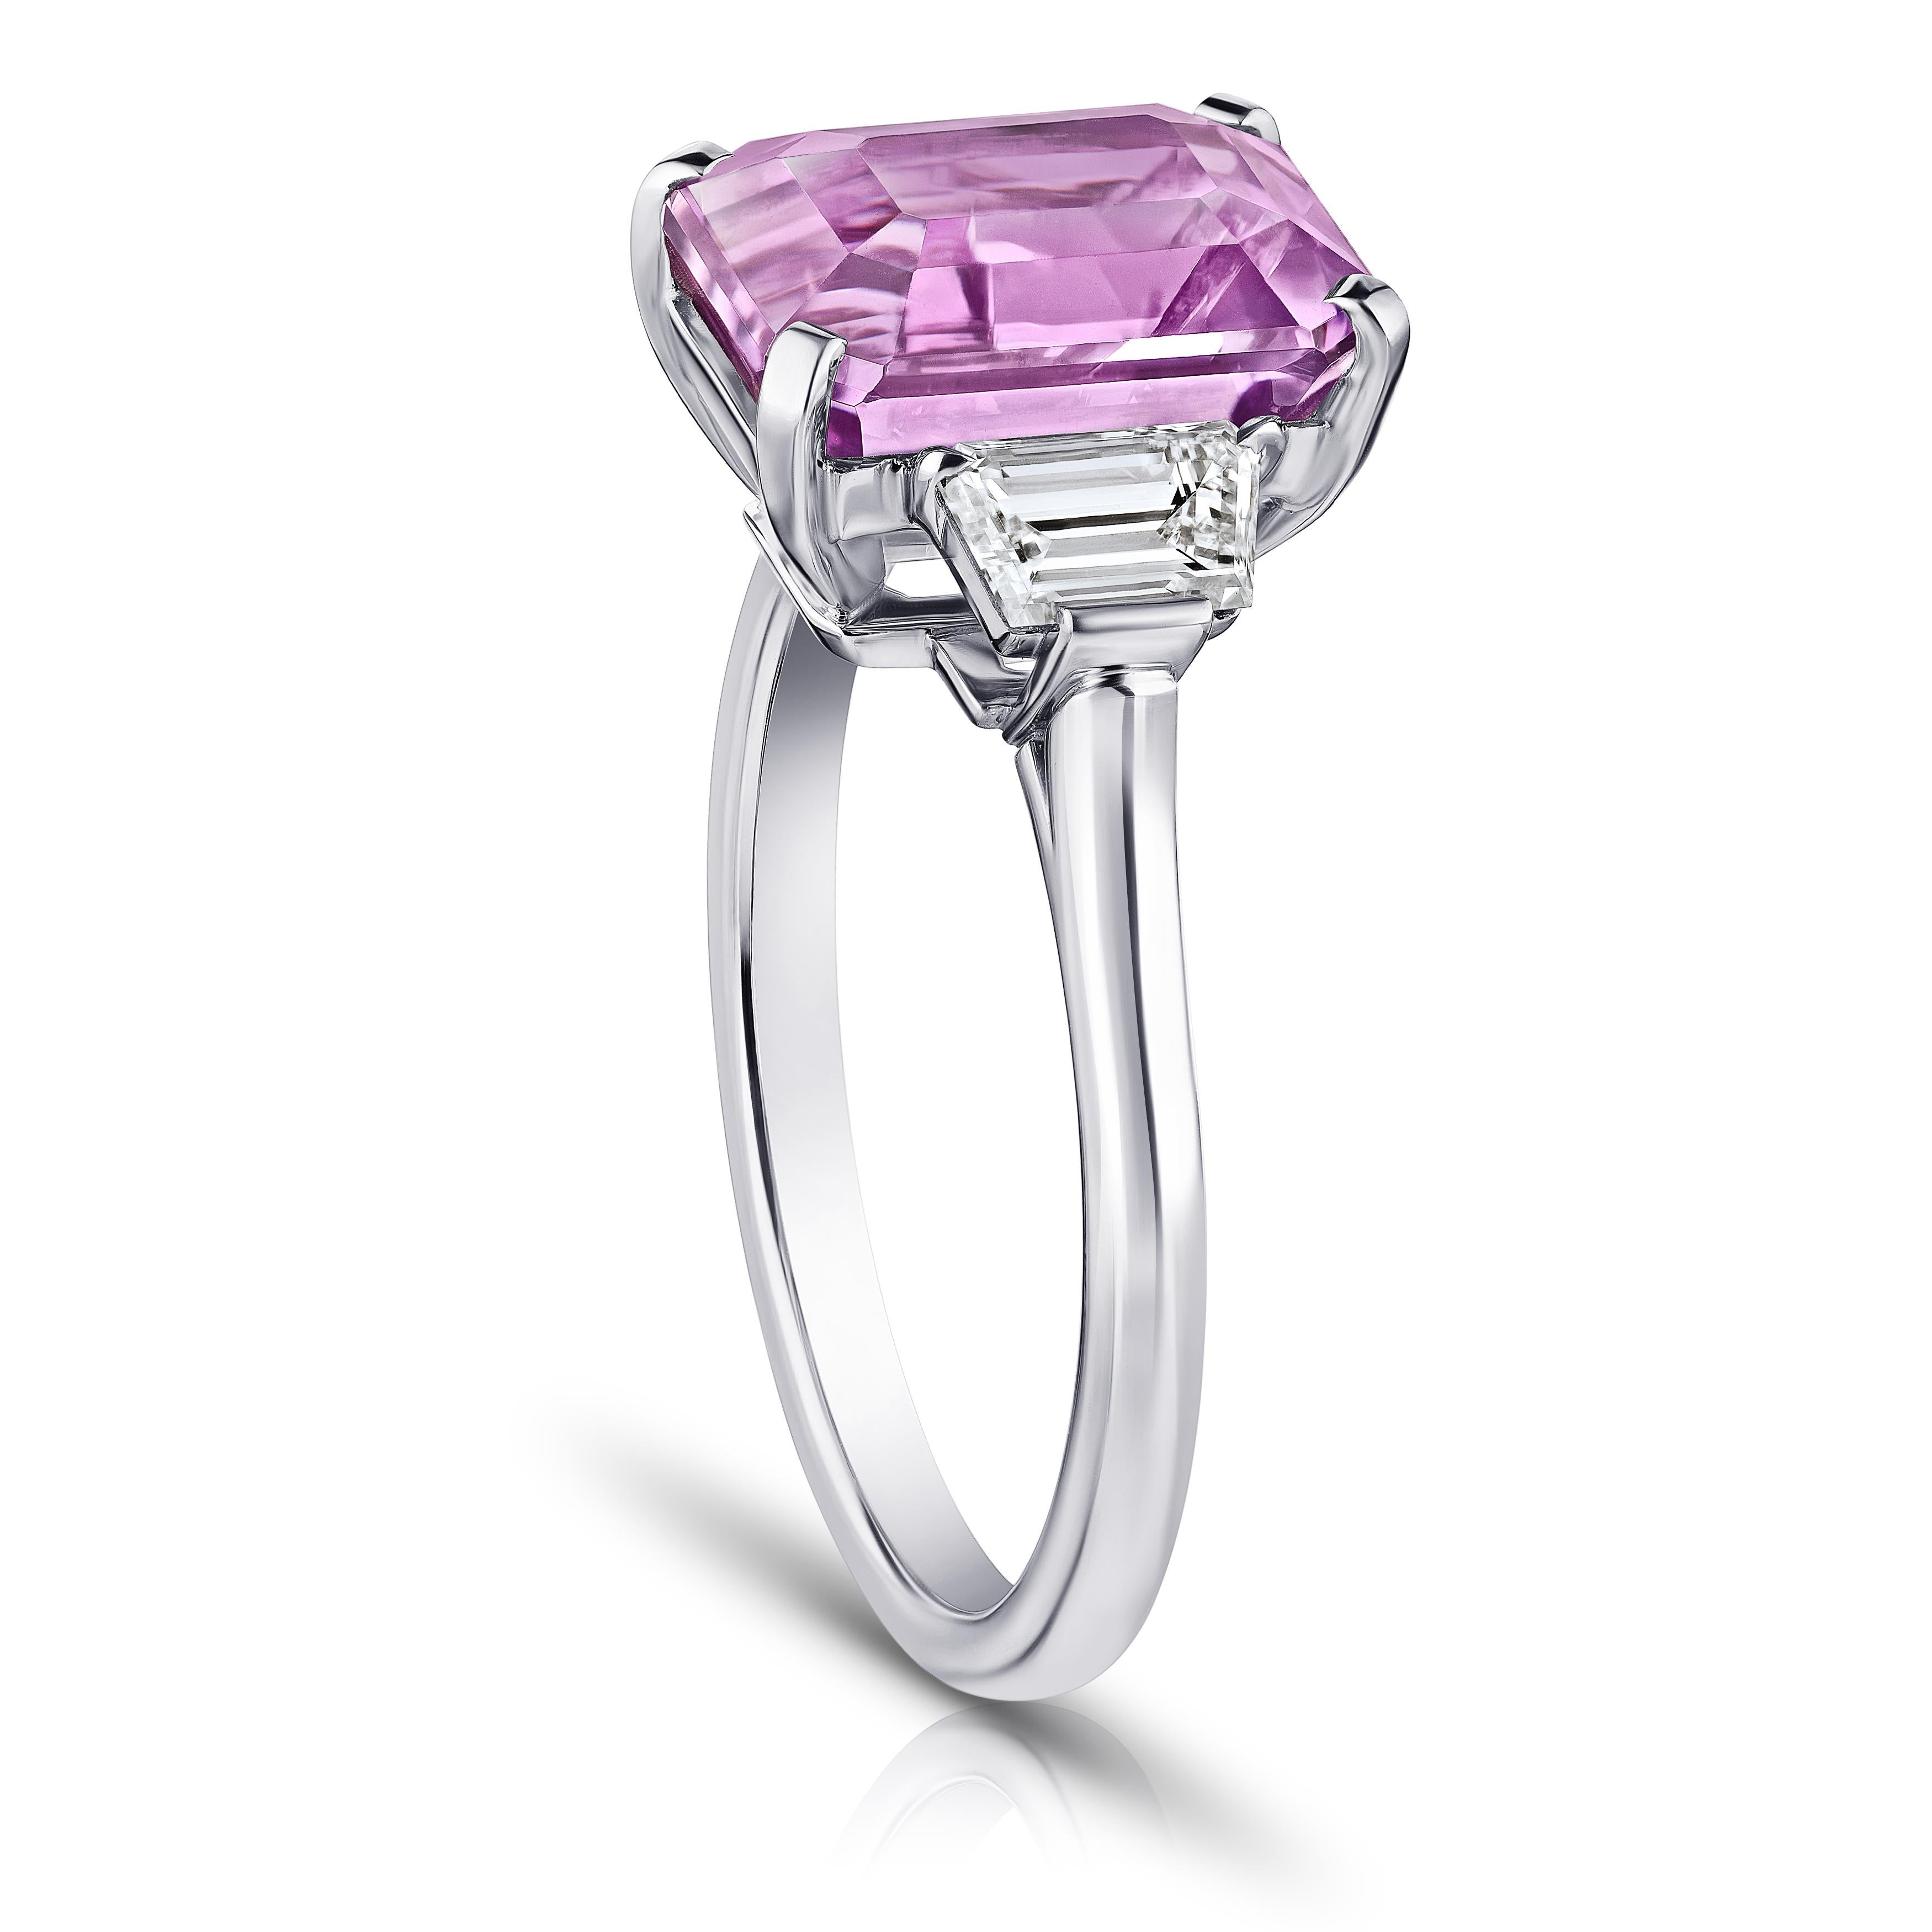 5.70 carat emerald cut pink sapphire with trapezoid step cut diamonds .71 carats set in a ring. Size 7.
